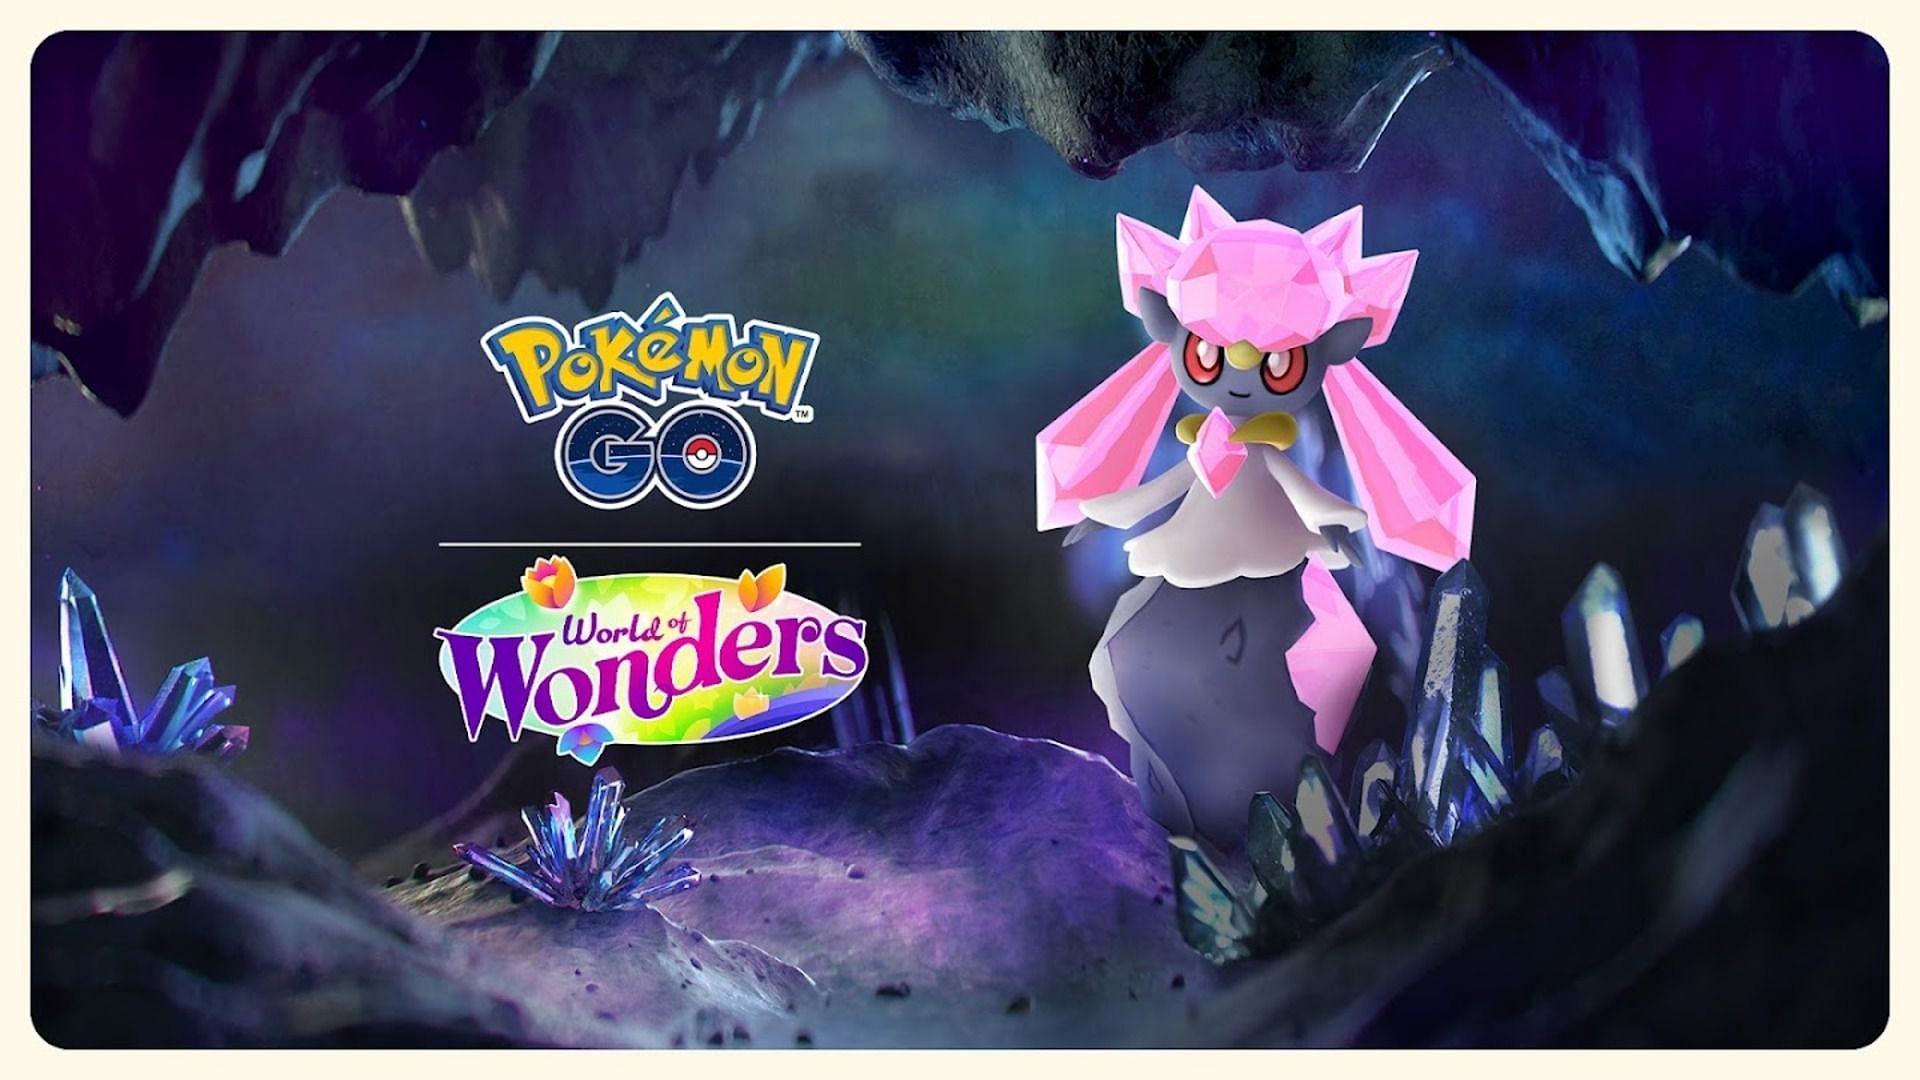 With Pokemon GO&#039;s World of Wonders only lasting another month, we can confirm that the Master Ball will be released in May (Image via Niantic)